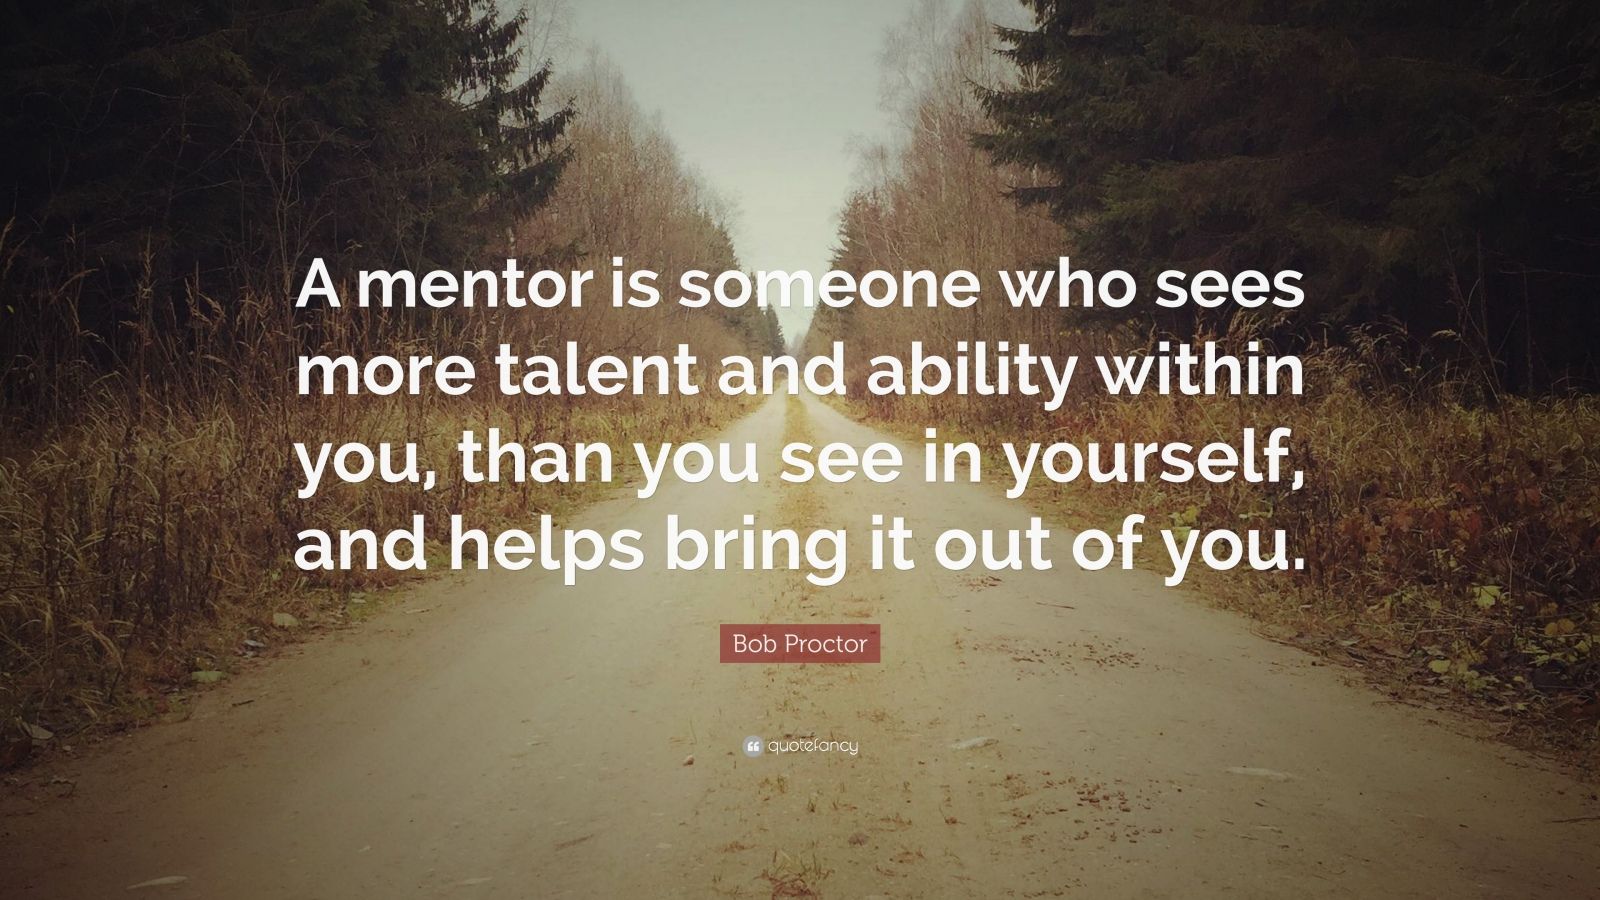 Bob Proctor Quote: “A mentor is someone who sees more talent and